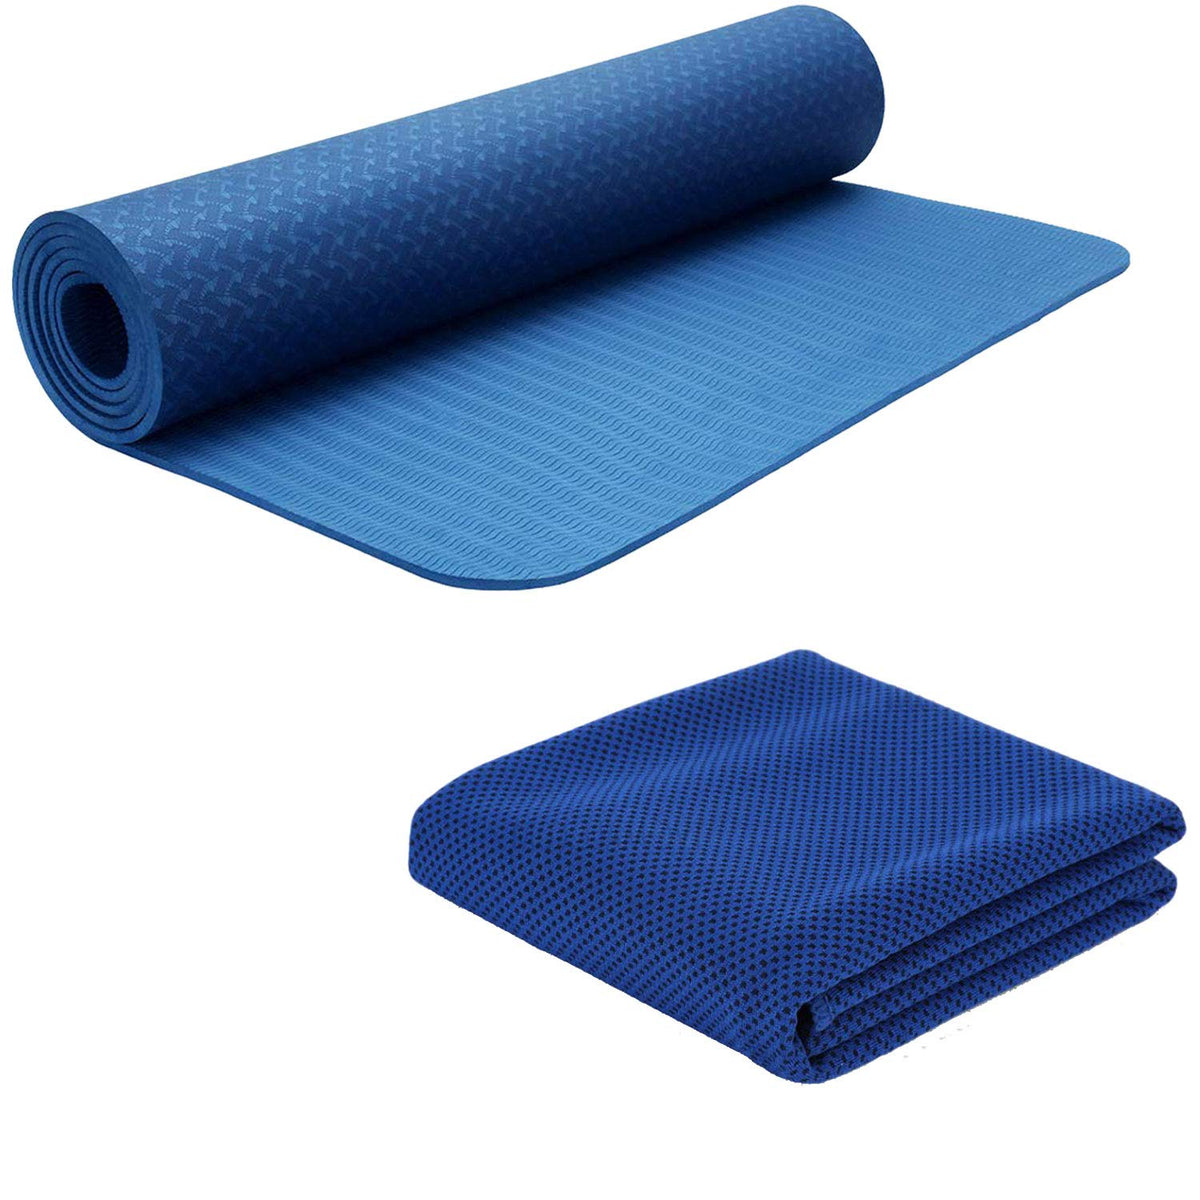 Strauss TPE Eco-Friendly Yoga Mat, 6mm (Blue) and Cooling Towel, 80 cm, (Blue)